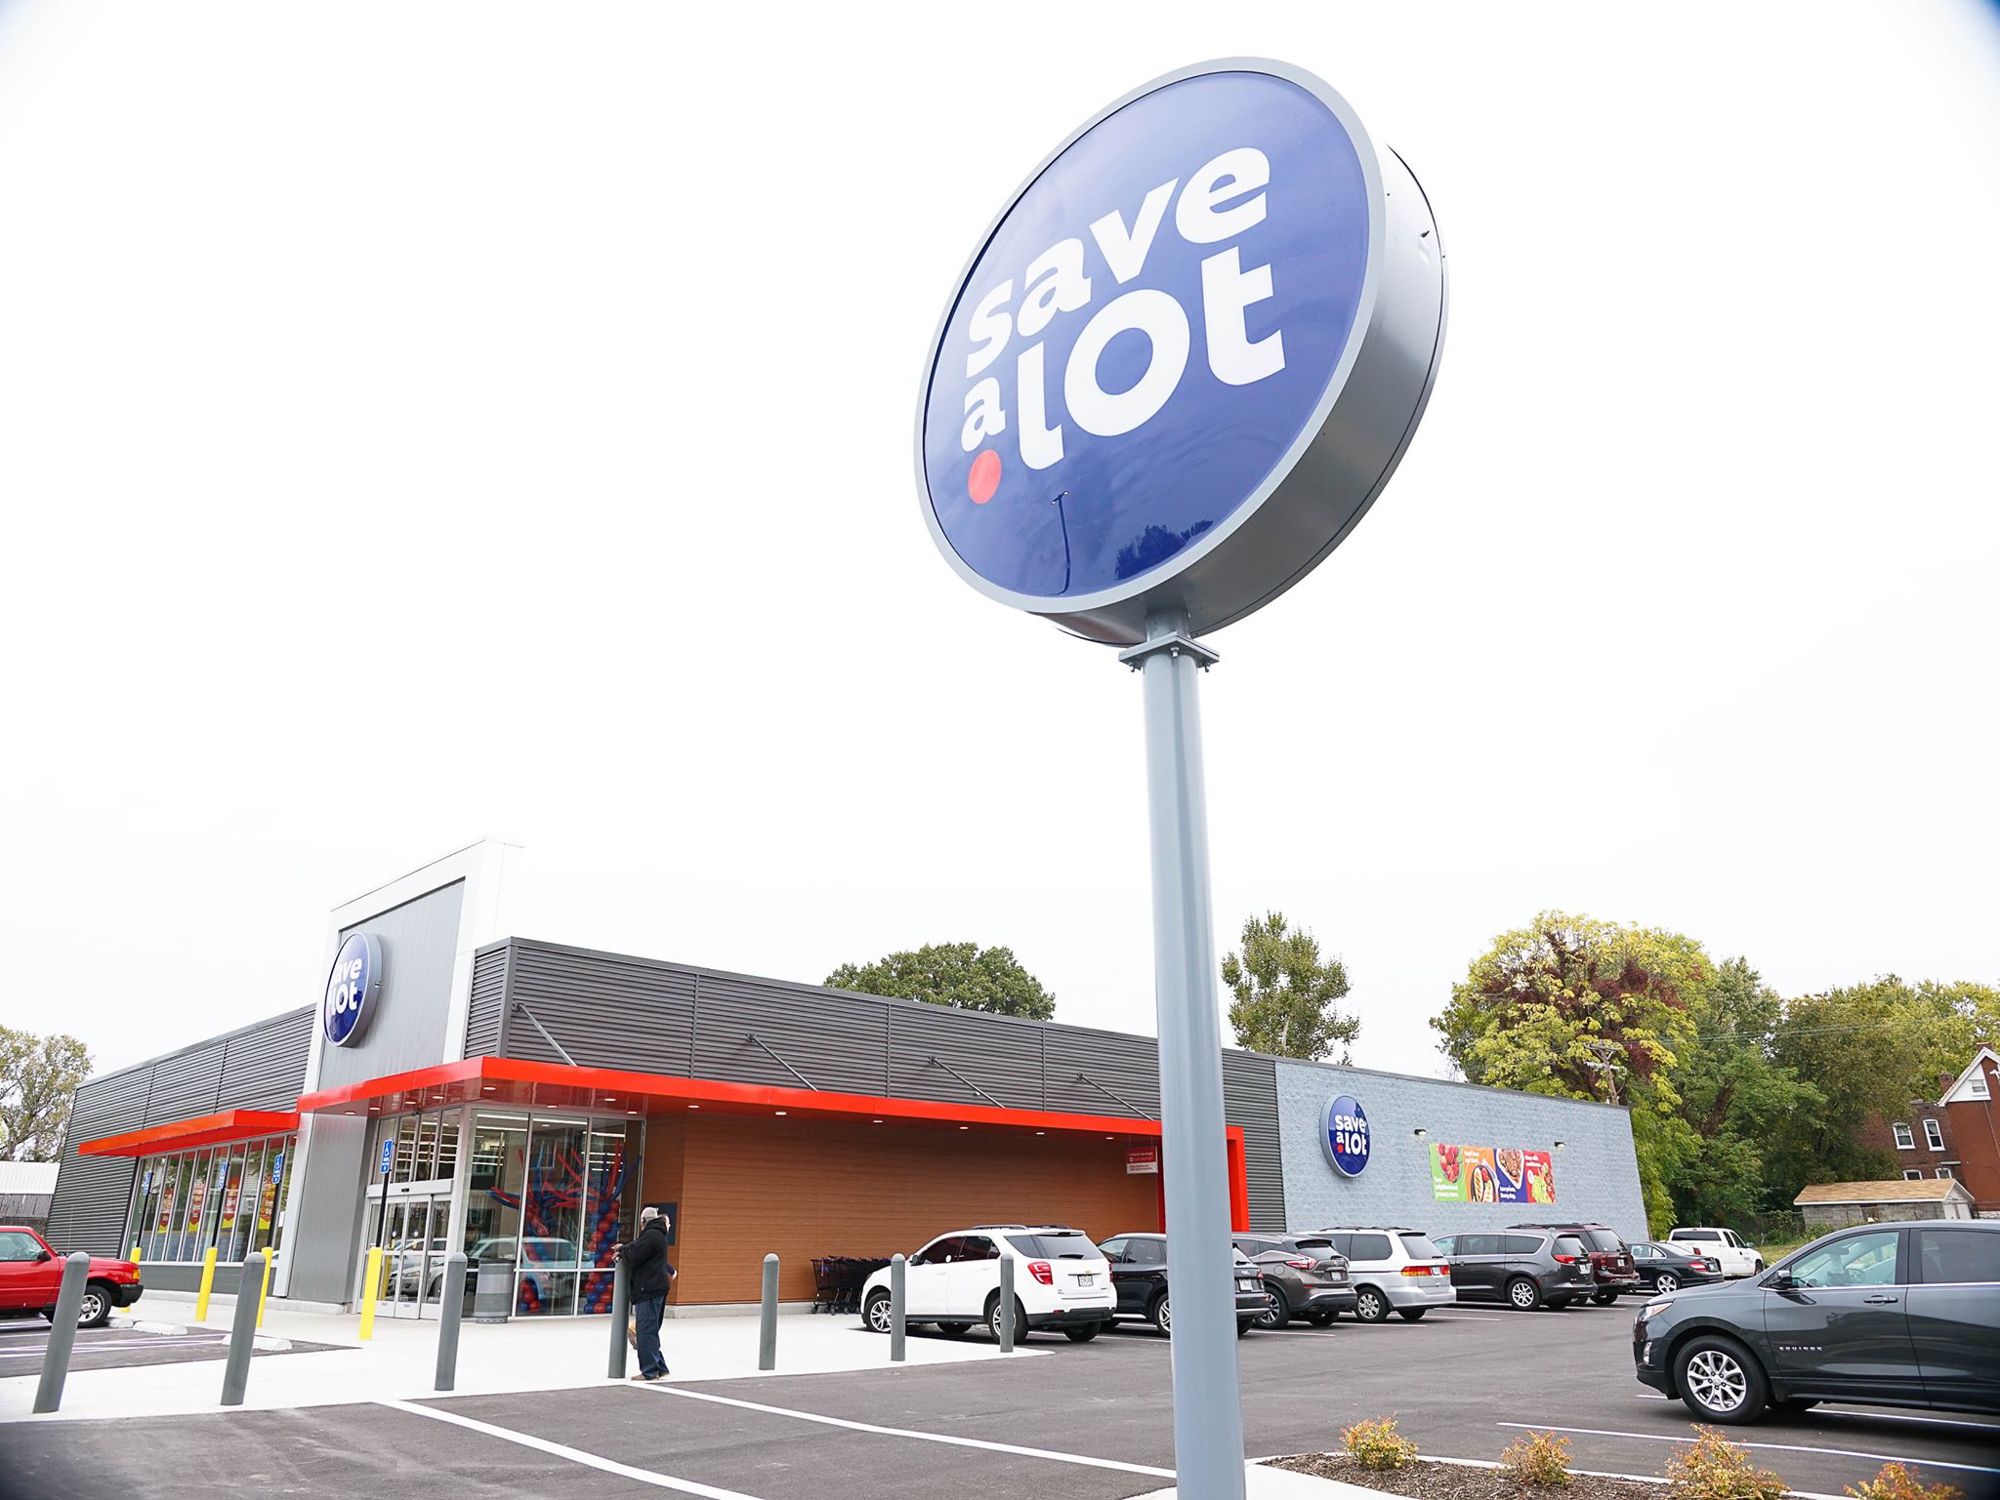 The new signage and branding for Save A Lot is shown in this photo from the company's Facebook page.